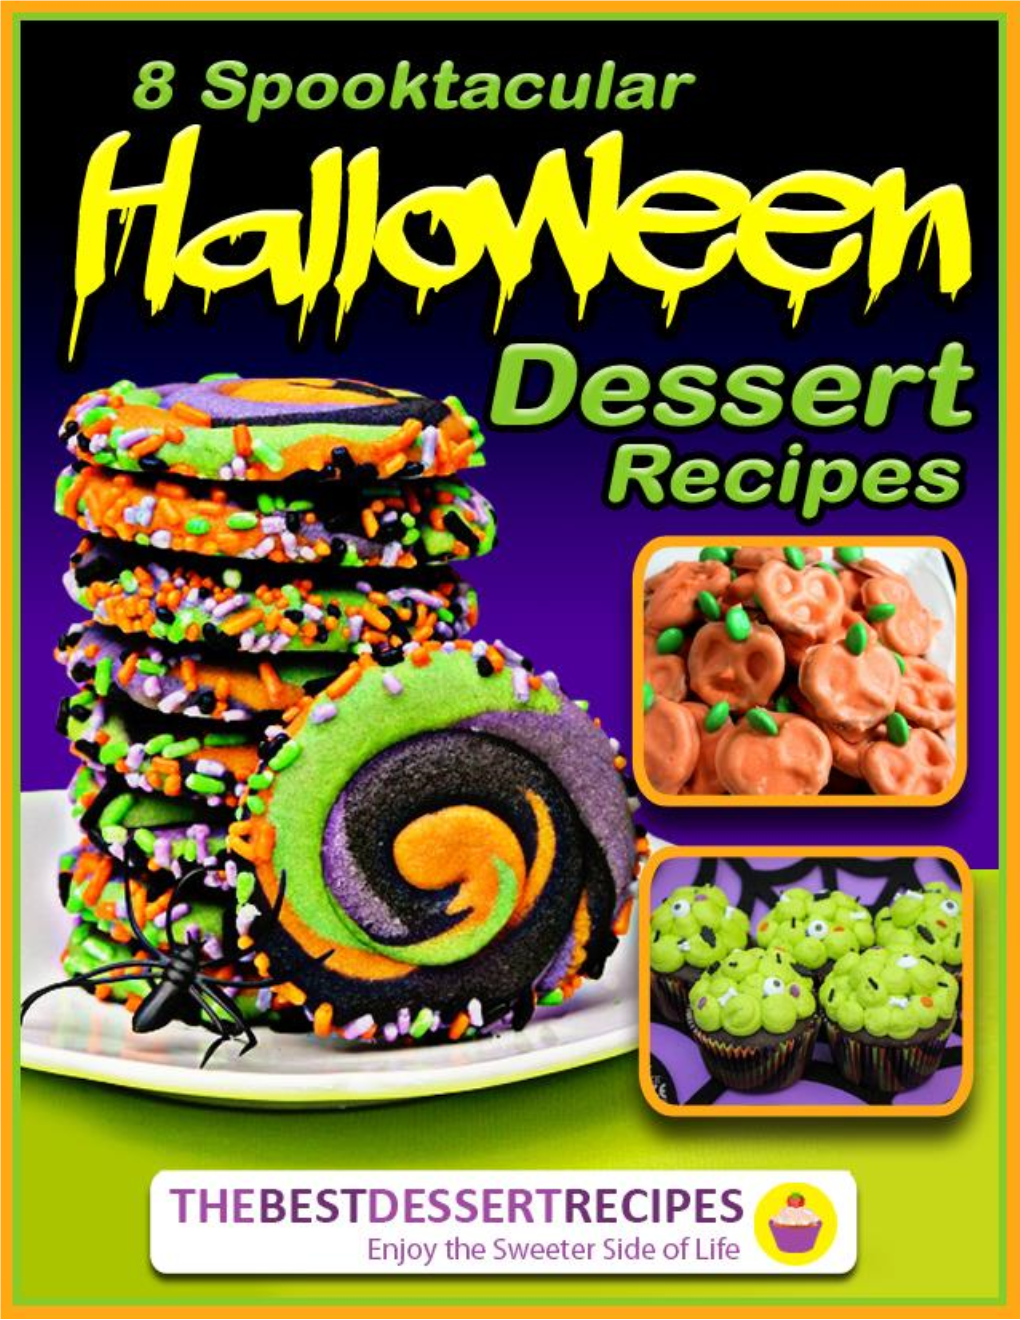 Download Your Free Copy of the 8 Spooktacular Halloween Dessert